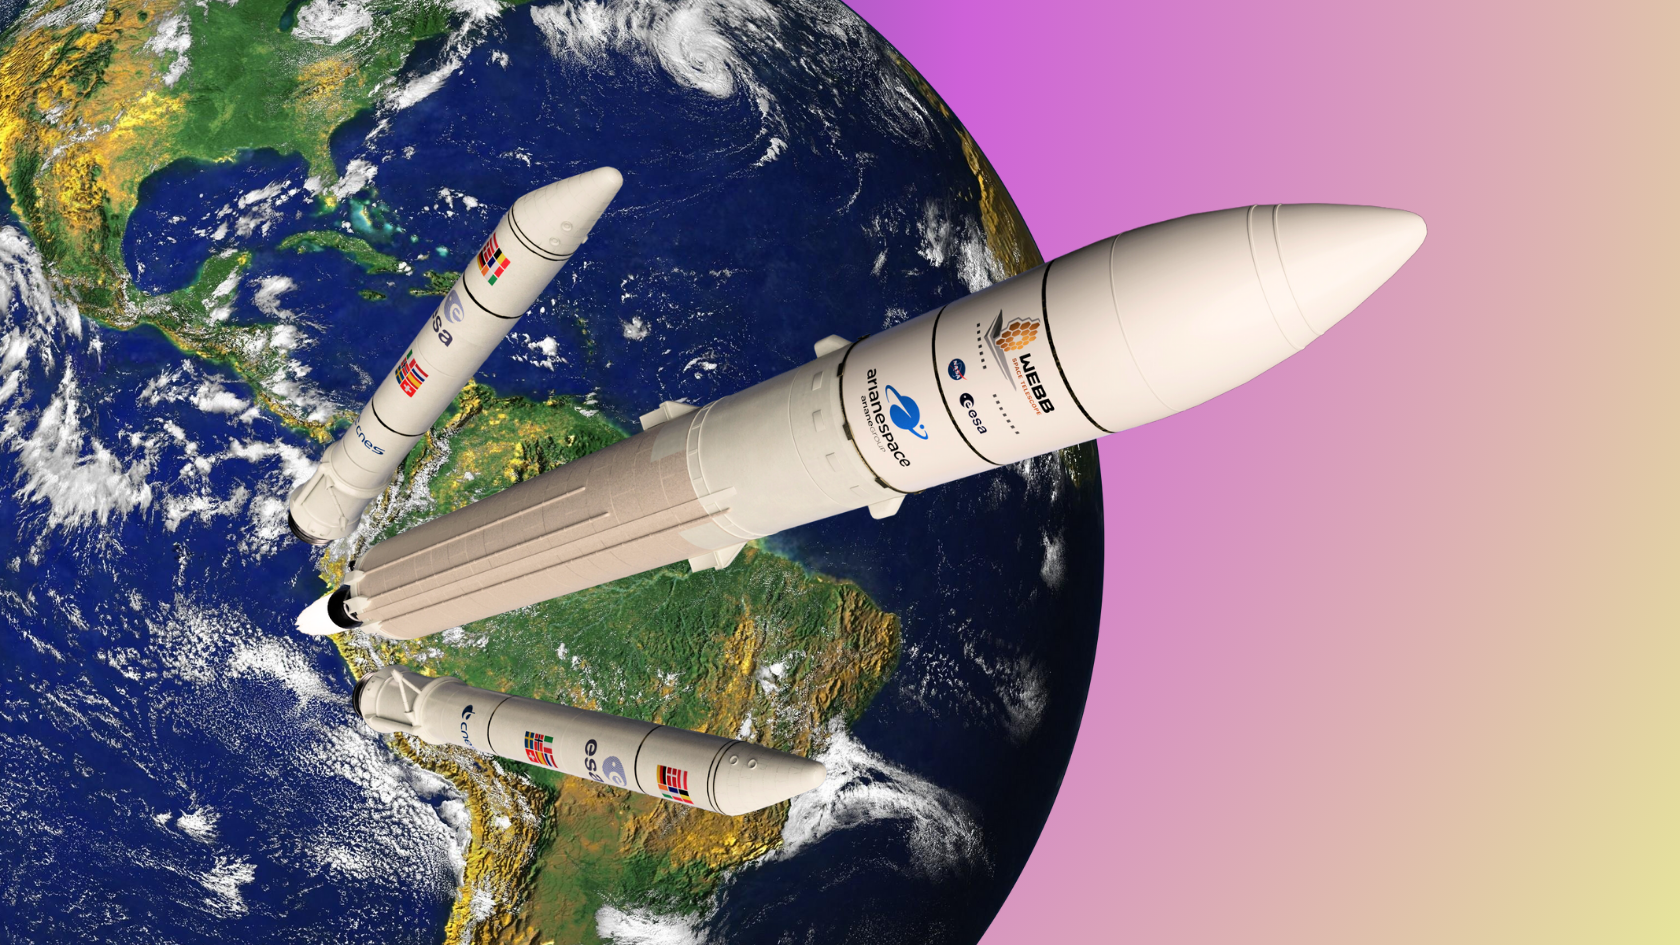 The End of 27 Years of Service for Ariane 5 Rocket